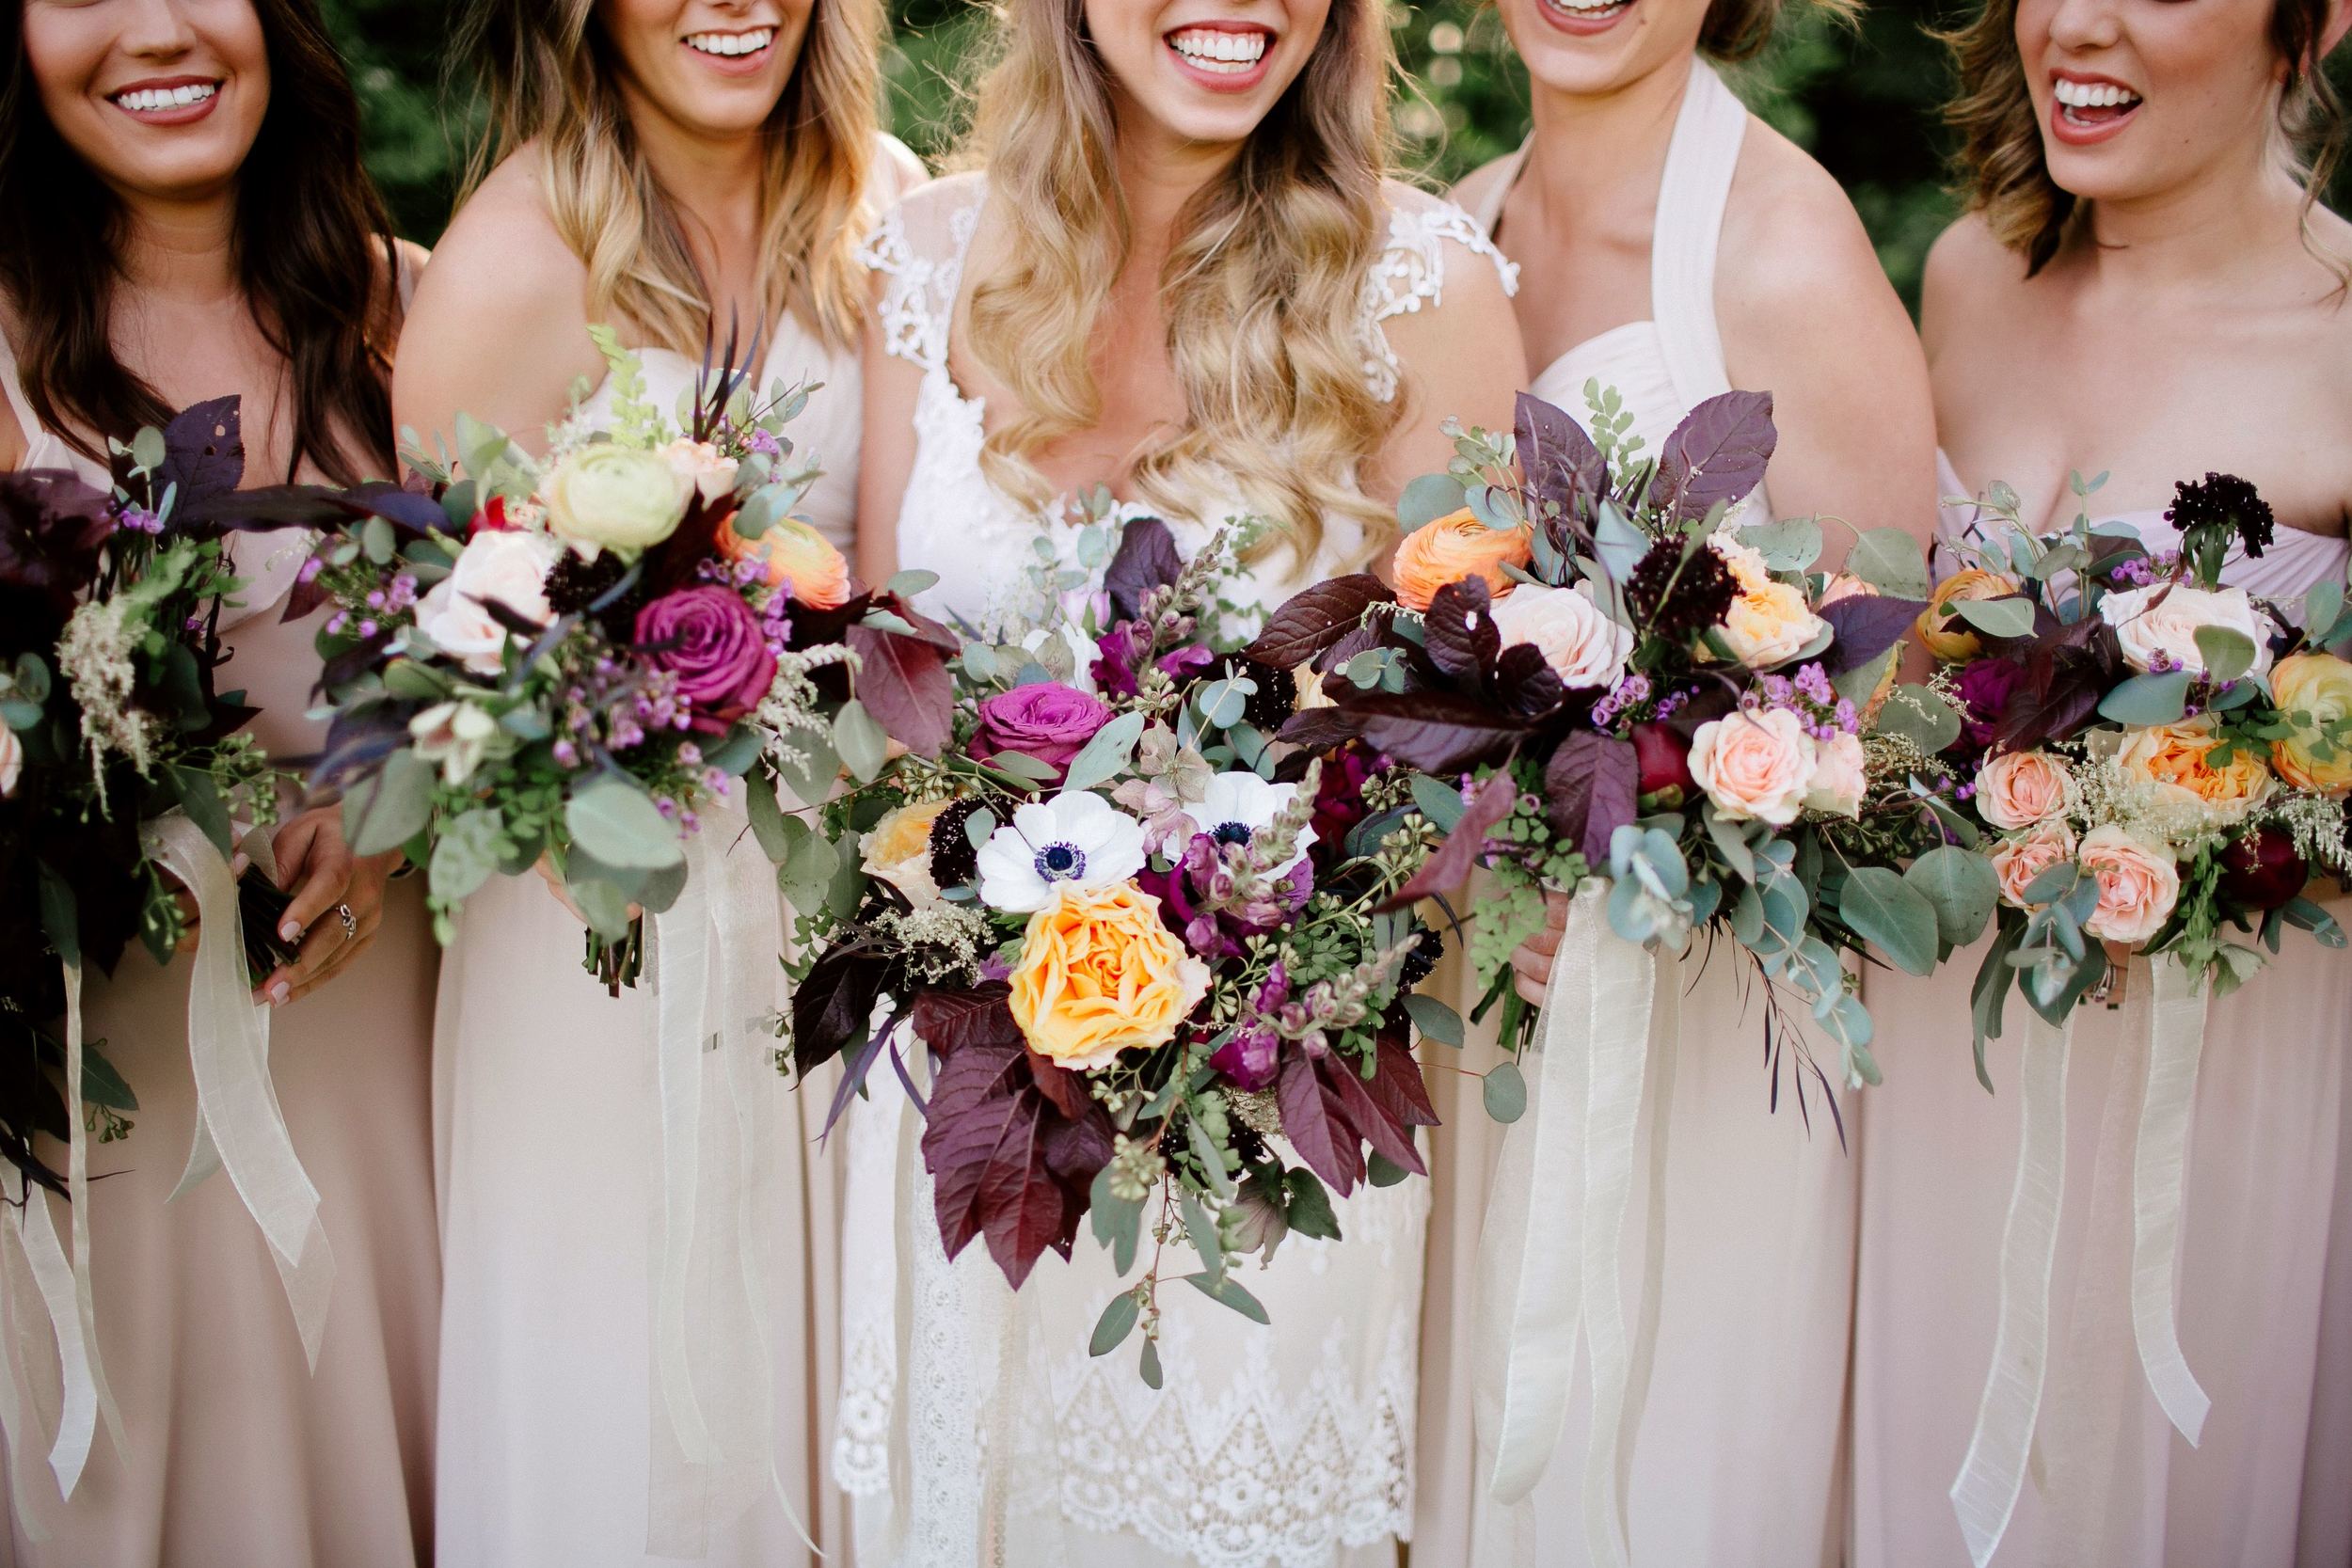 Bohemian bridal party with florals in lavender, peach, and maroon